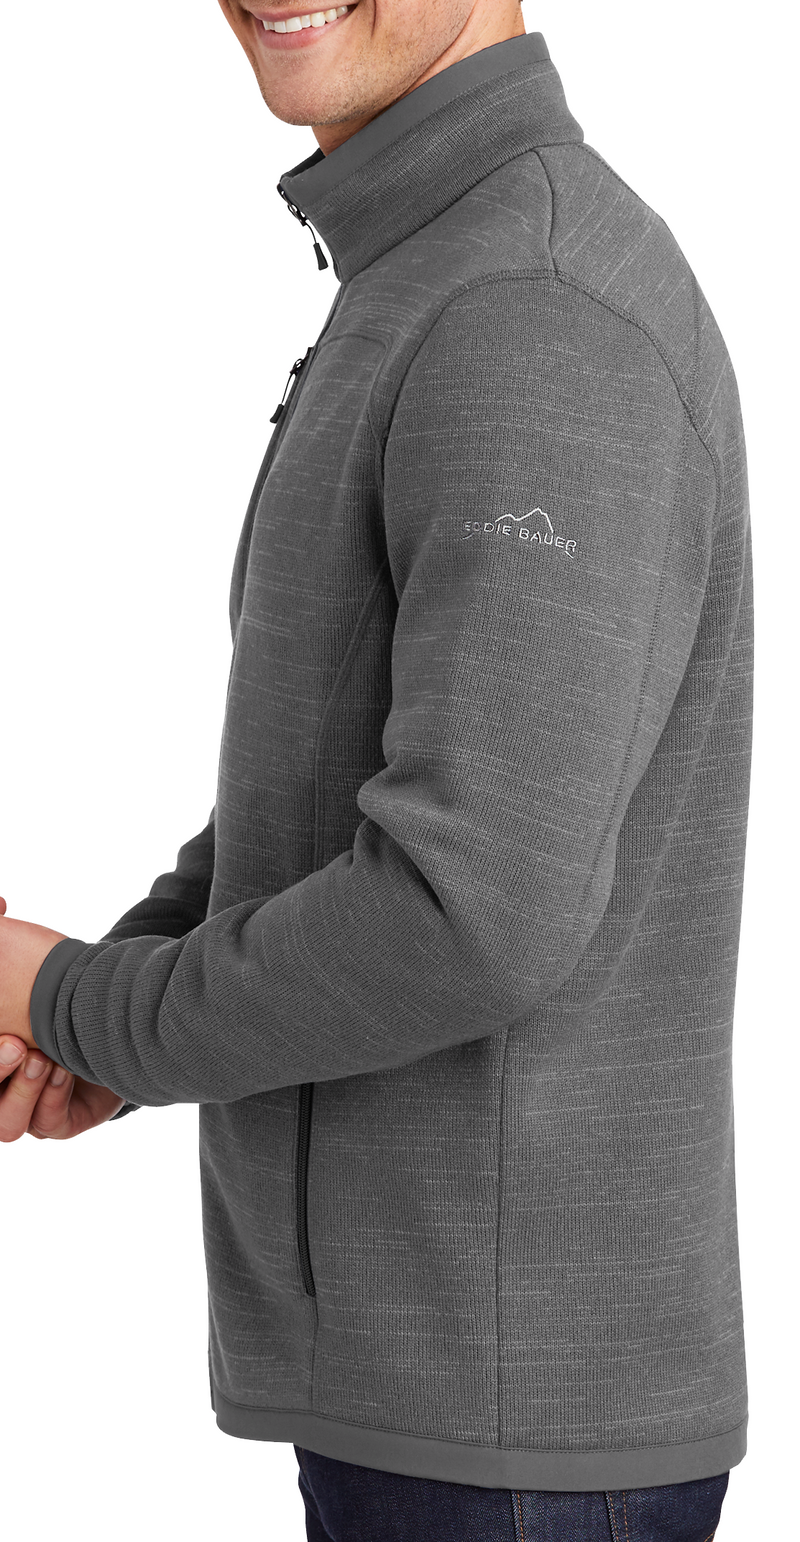 Eddie Bauer [EB250] Sweater Fleece Full-Zip. Buy More and Save.